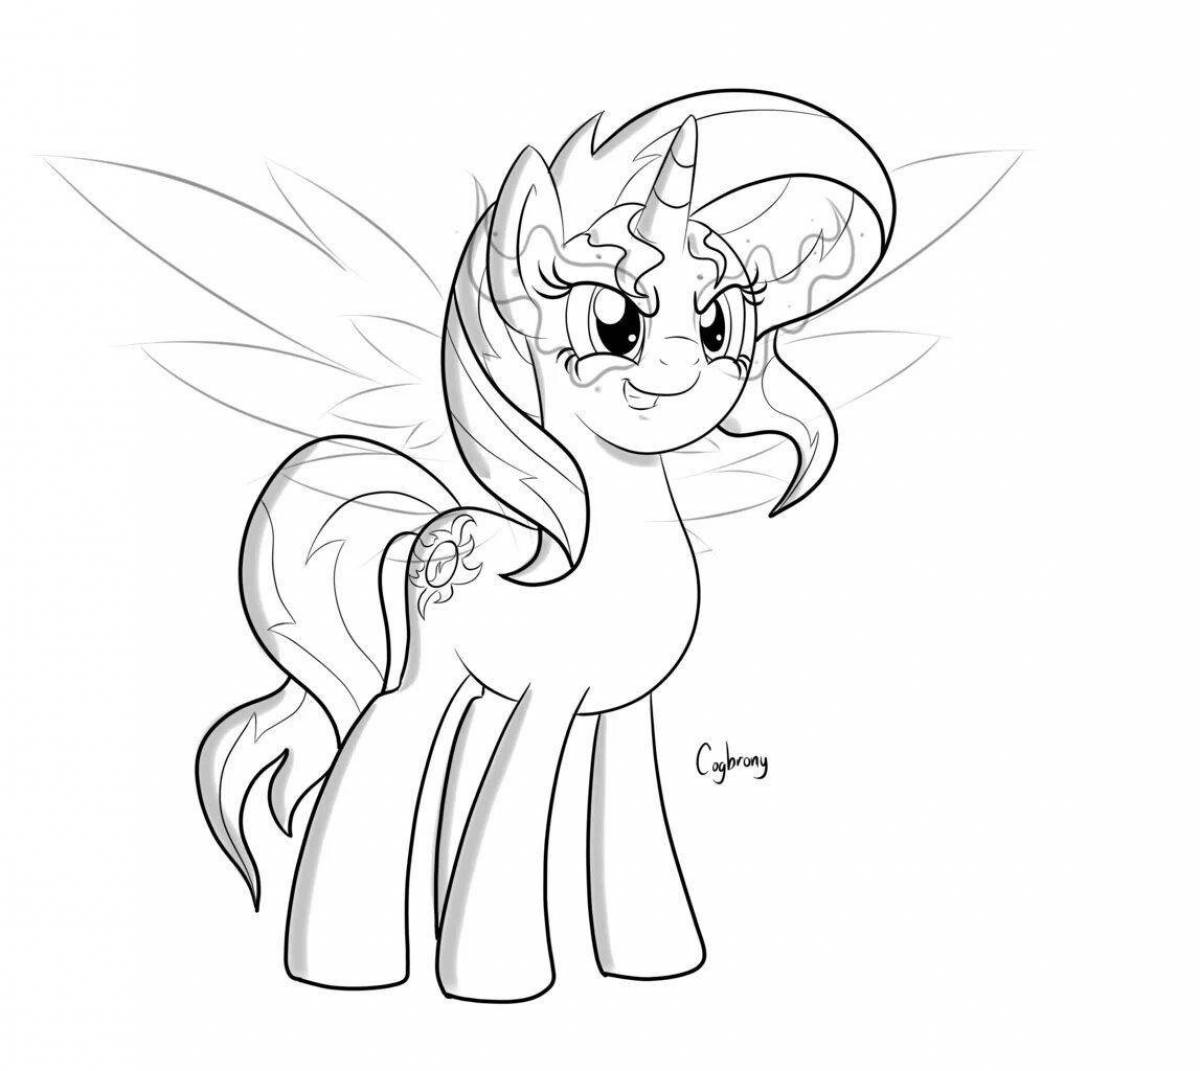 Awesome sunset shimmer coloring page